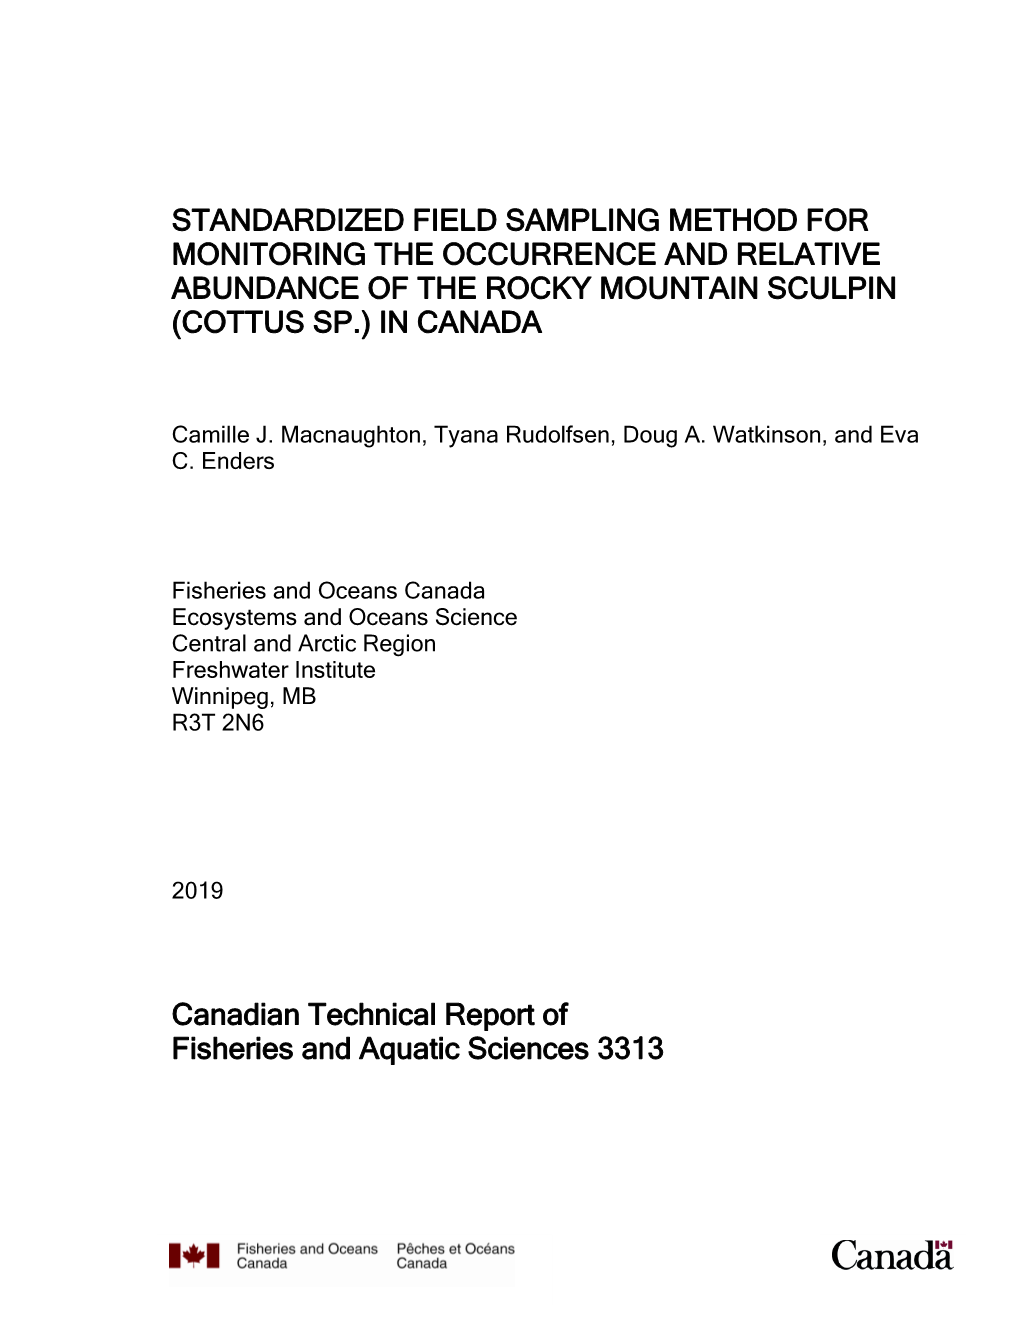 Standardized Field Sampling Method for Monitoring the Occurrence and Relative Abundance of the Rocky Mountain Sculpin (Cottus Sp.) in Canada